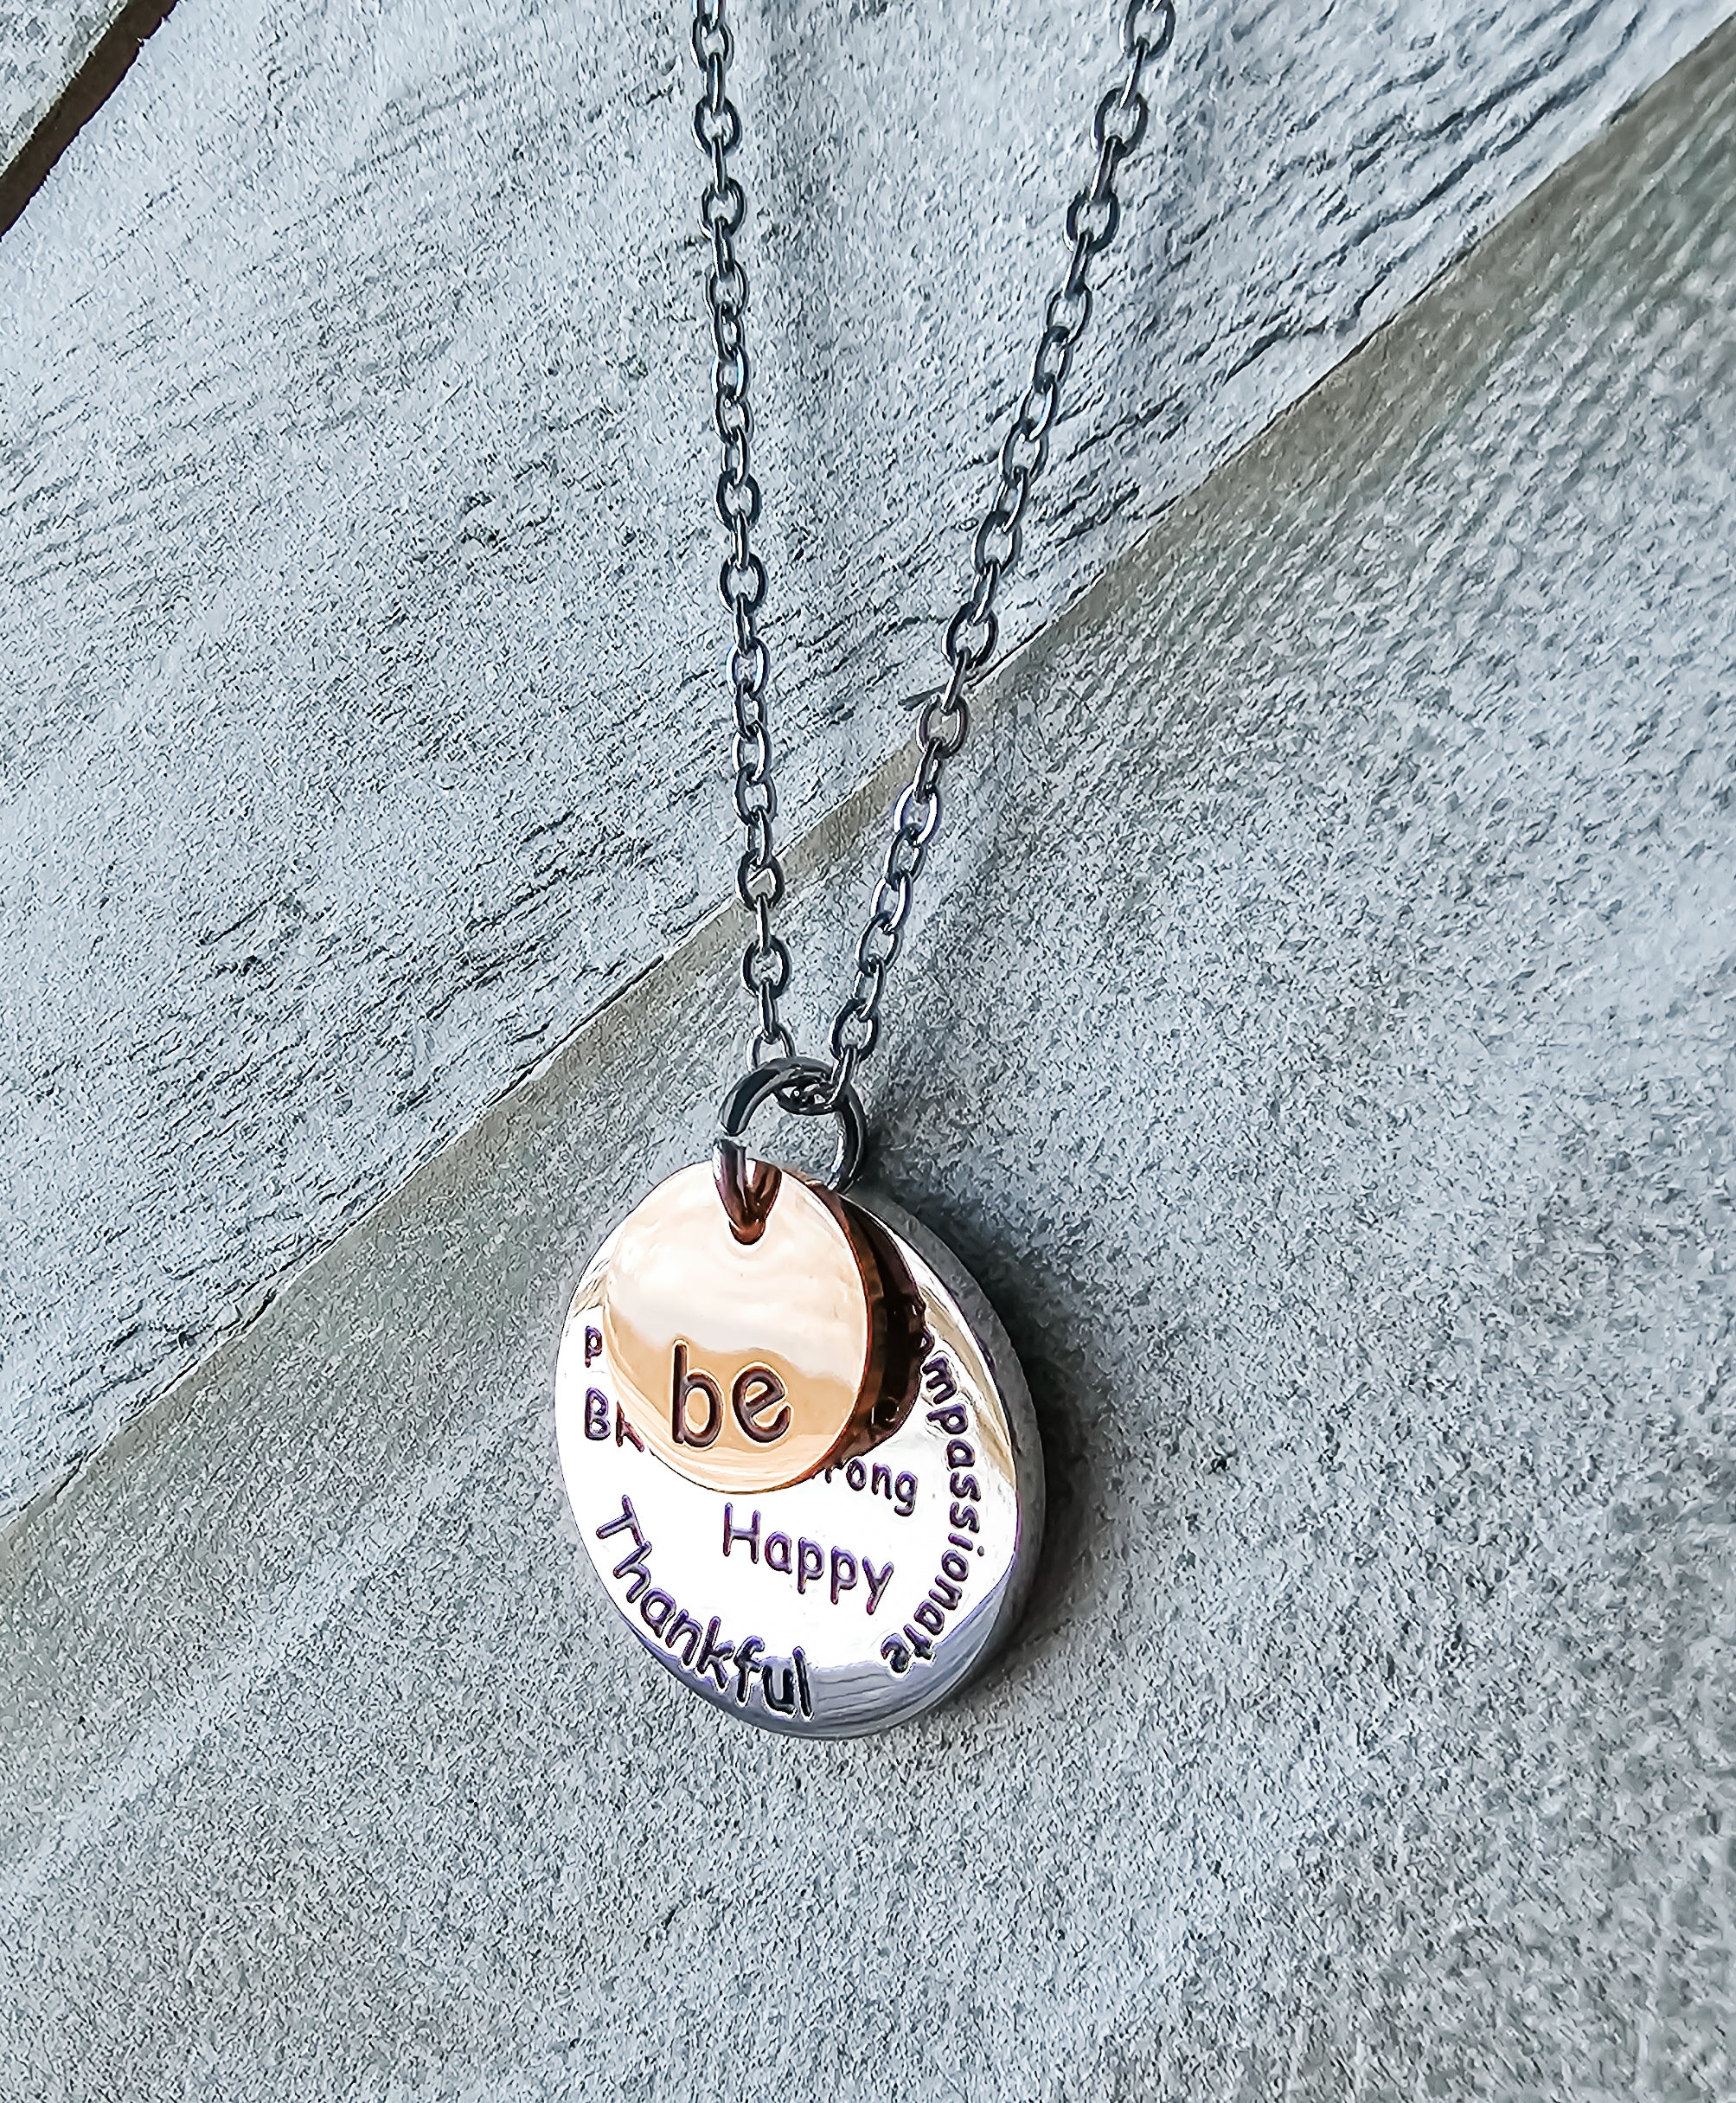 Be Happy, Thankful, Brave Strong - Pendant Necklace